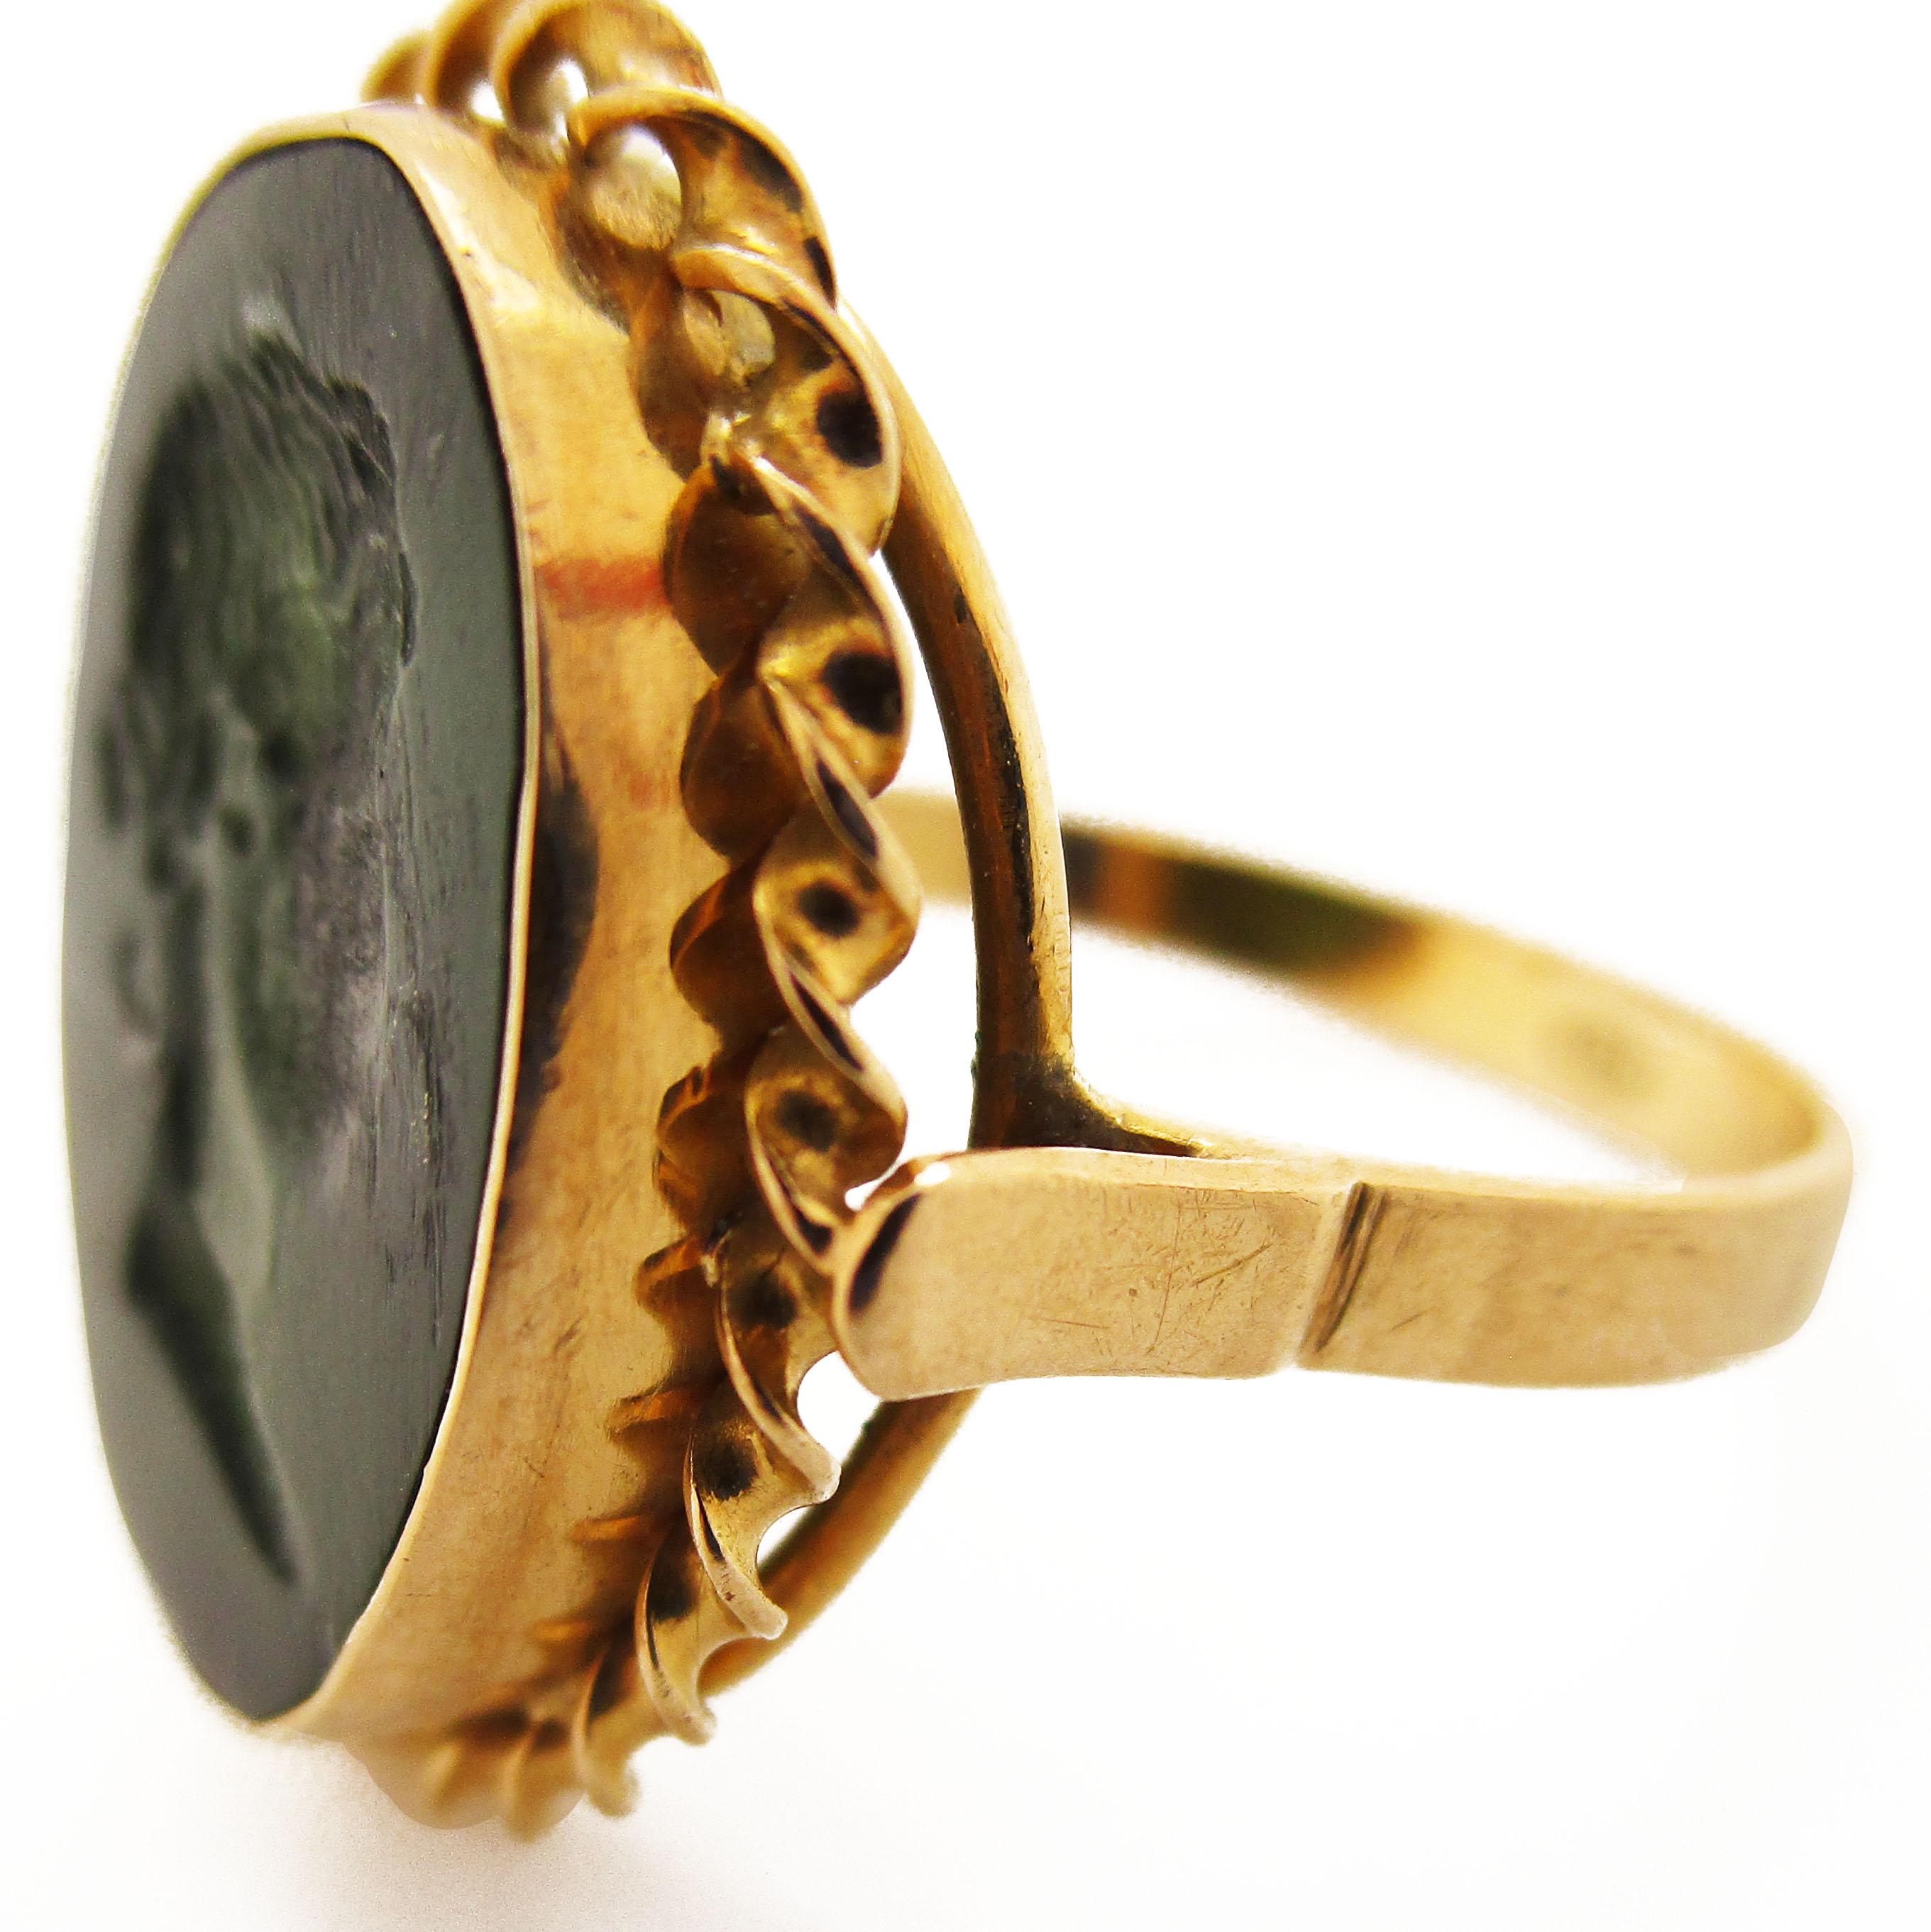 This is an amazing original hand-carved serpentine intaglio ring! The ring is 18 karat yellow gold, with a gorgeous twisted detailing framing the carved serpentine centerpiece. The serpentine is deep green in color and in great shape. The